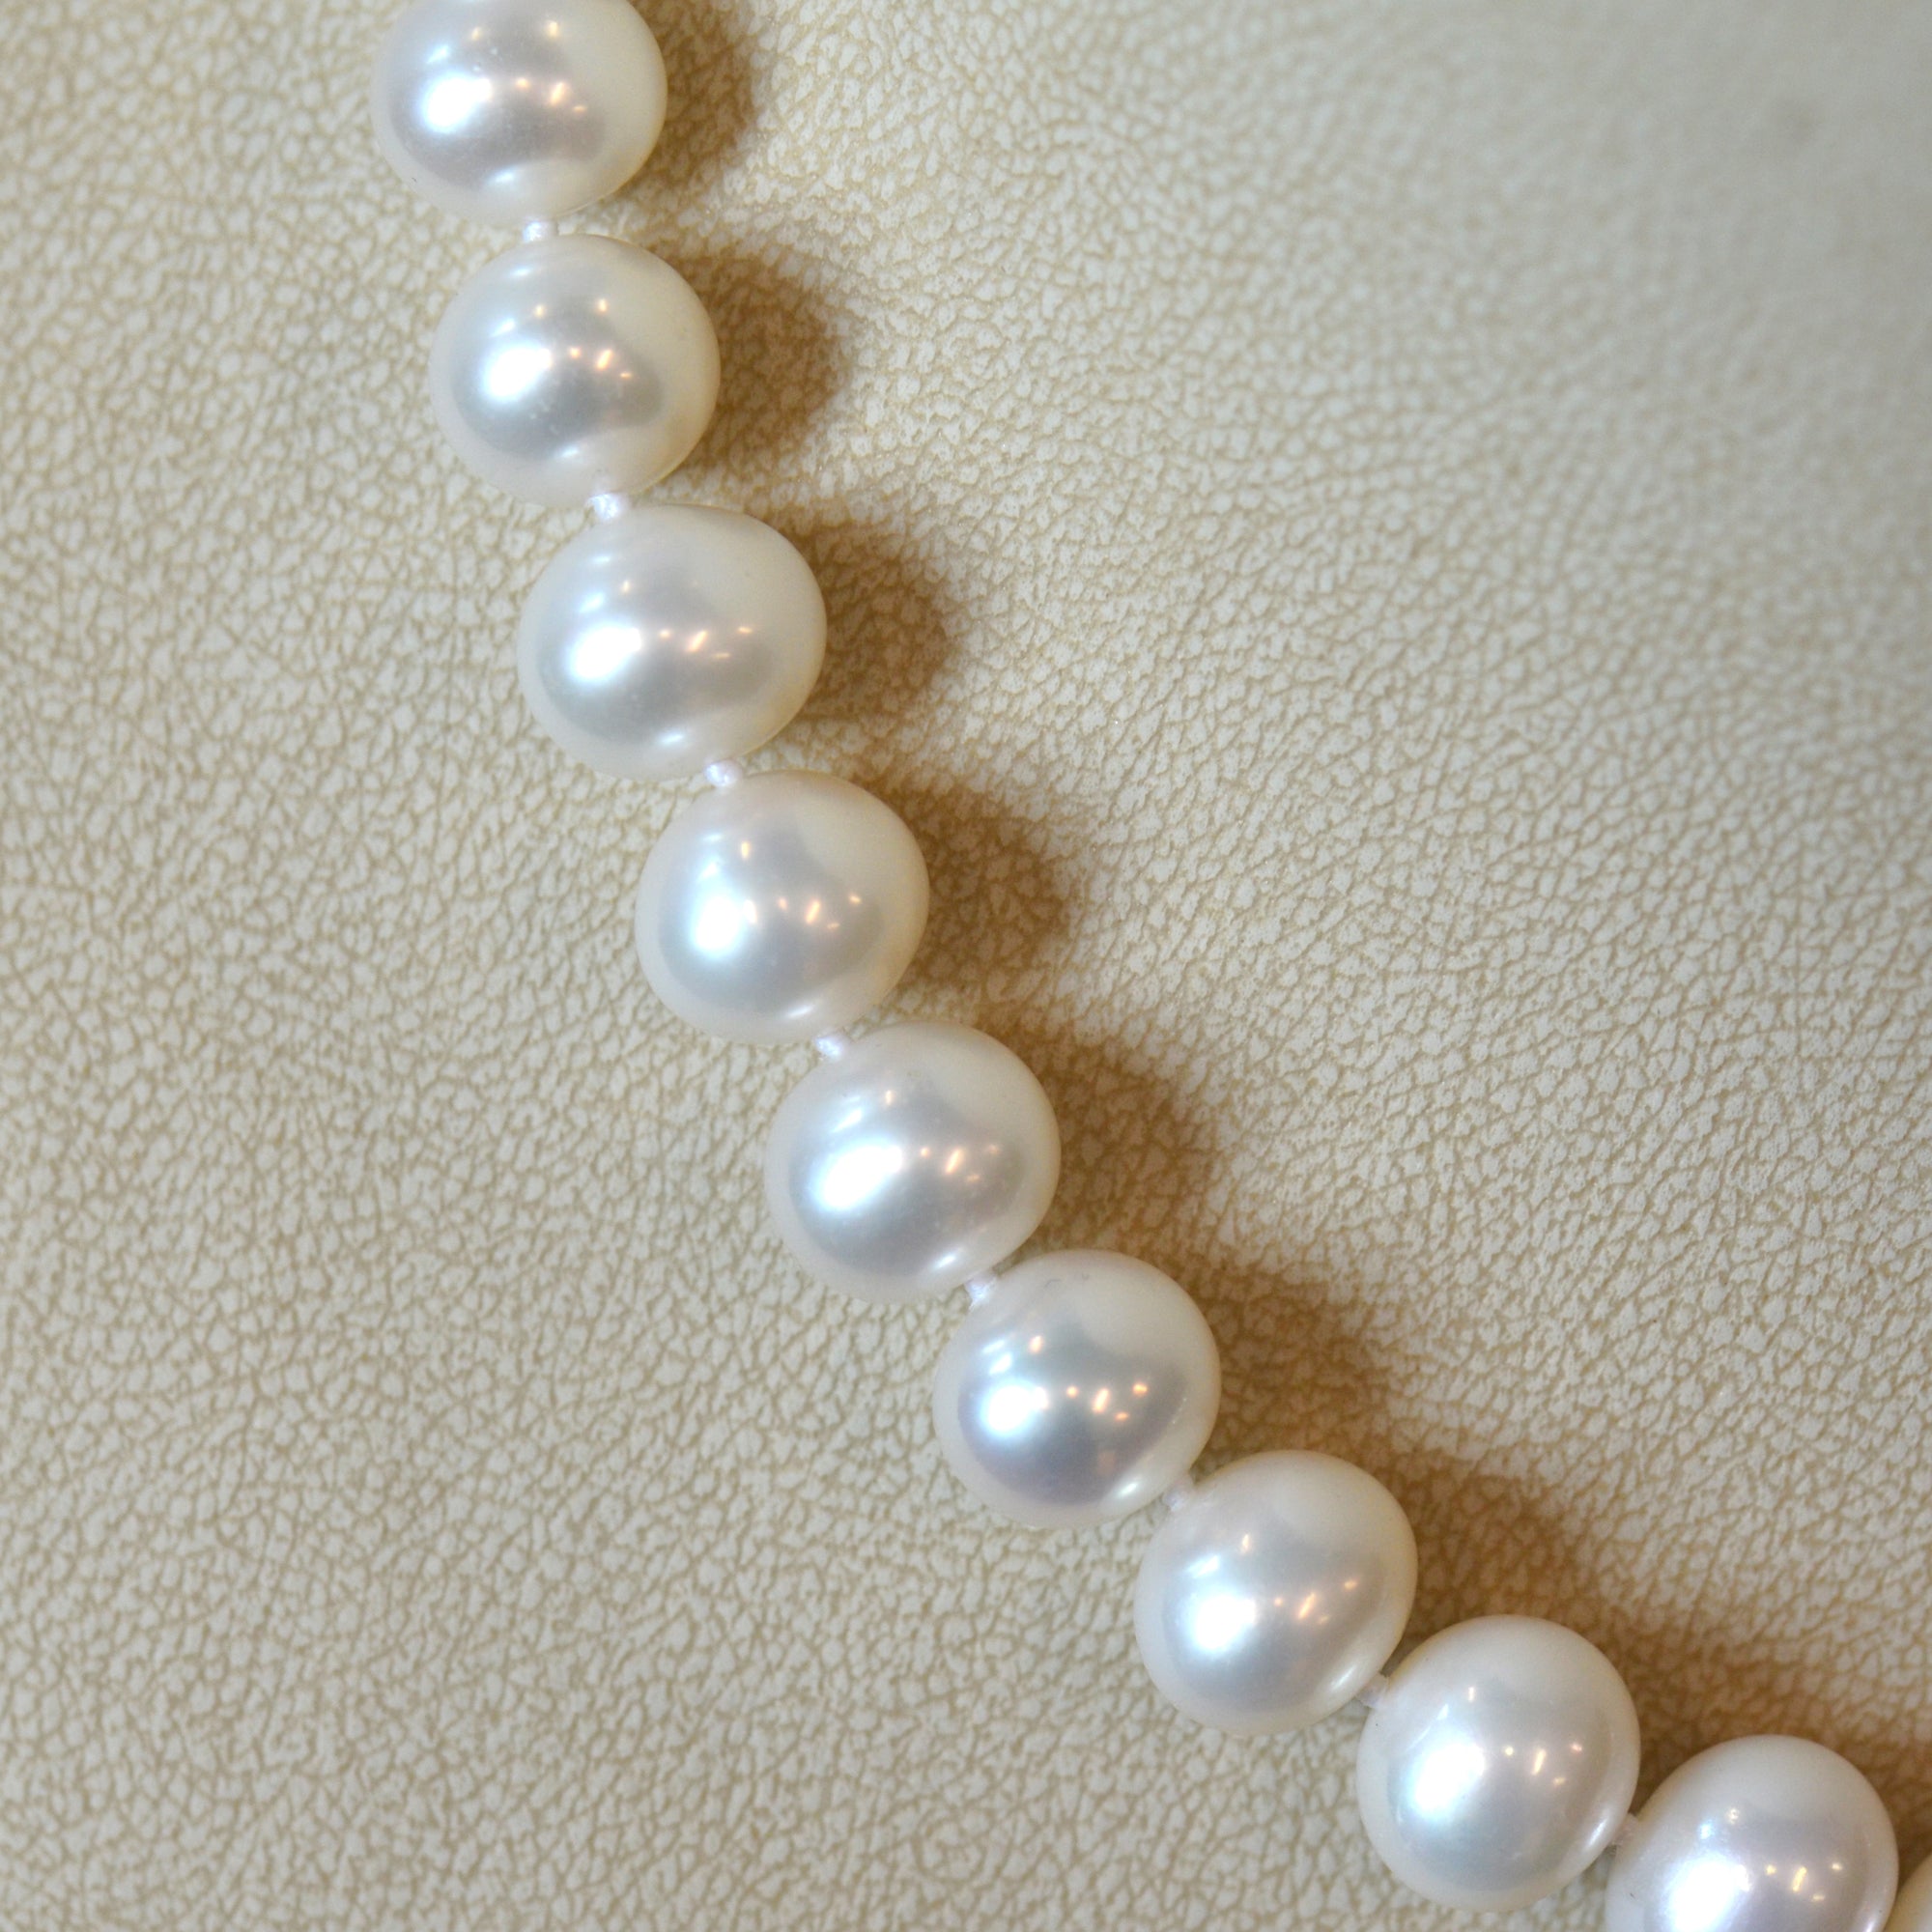 Freshwater Pearl Necklace With 14K White Gold Diamond Clasp